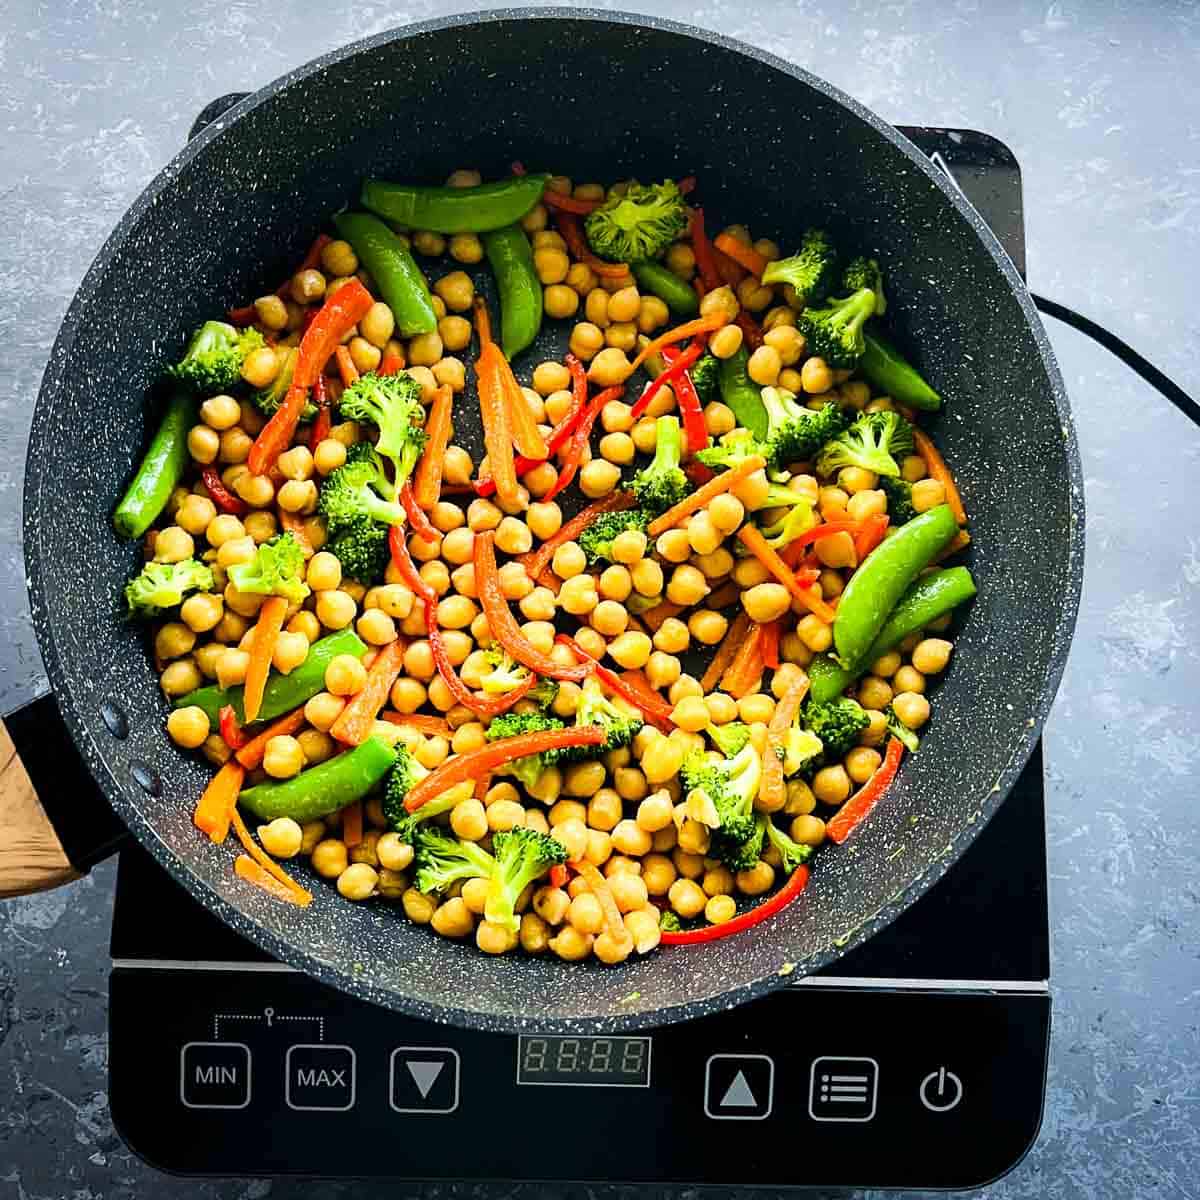 Veggies, chickpeas, and spices sauted in a frying pan.